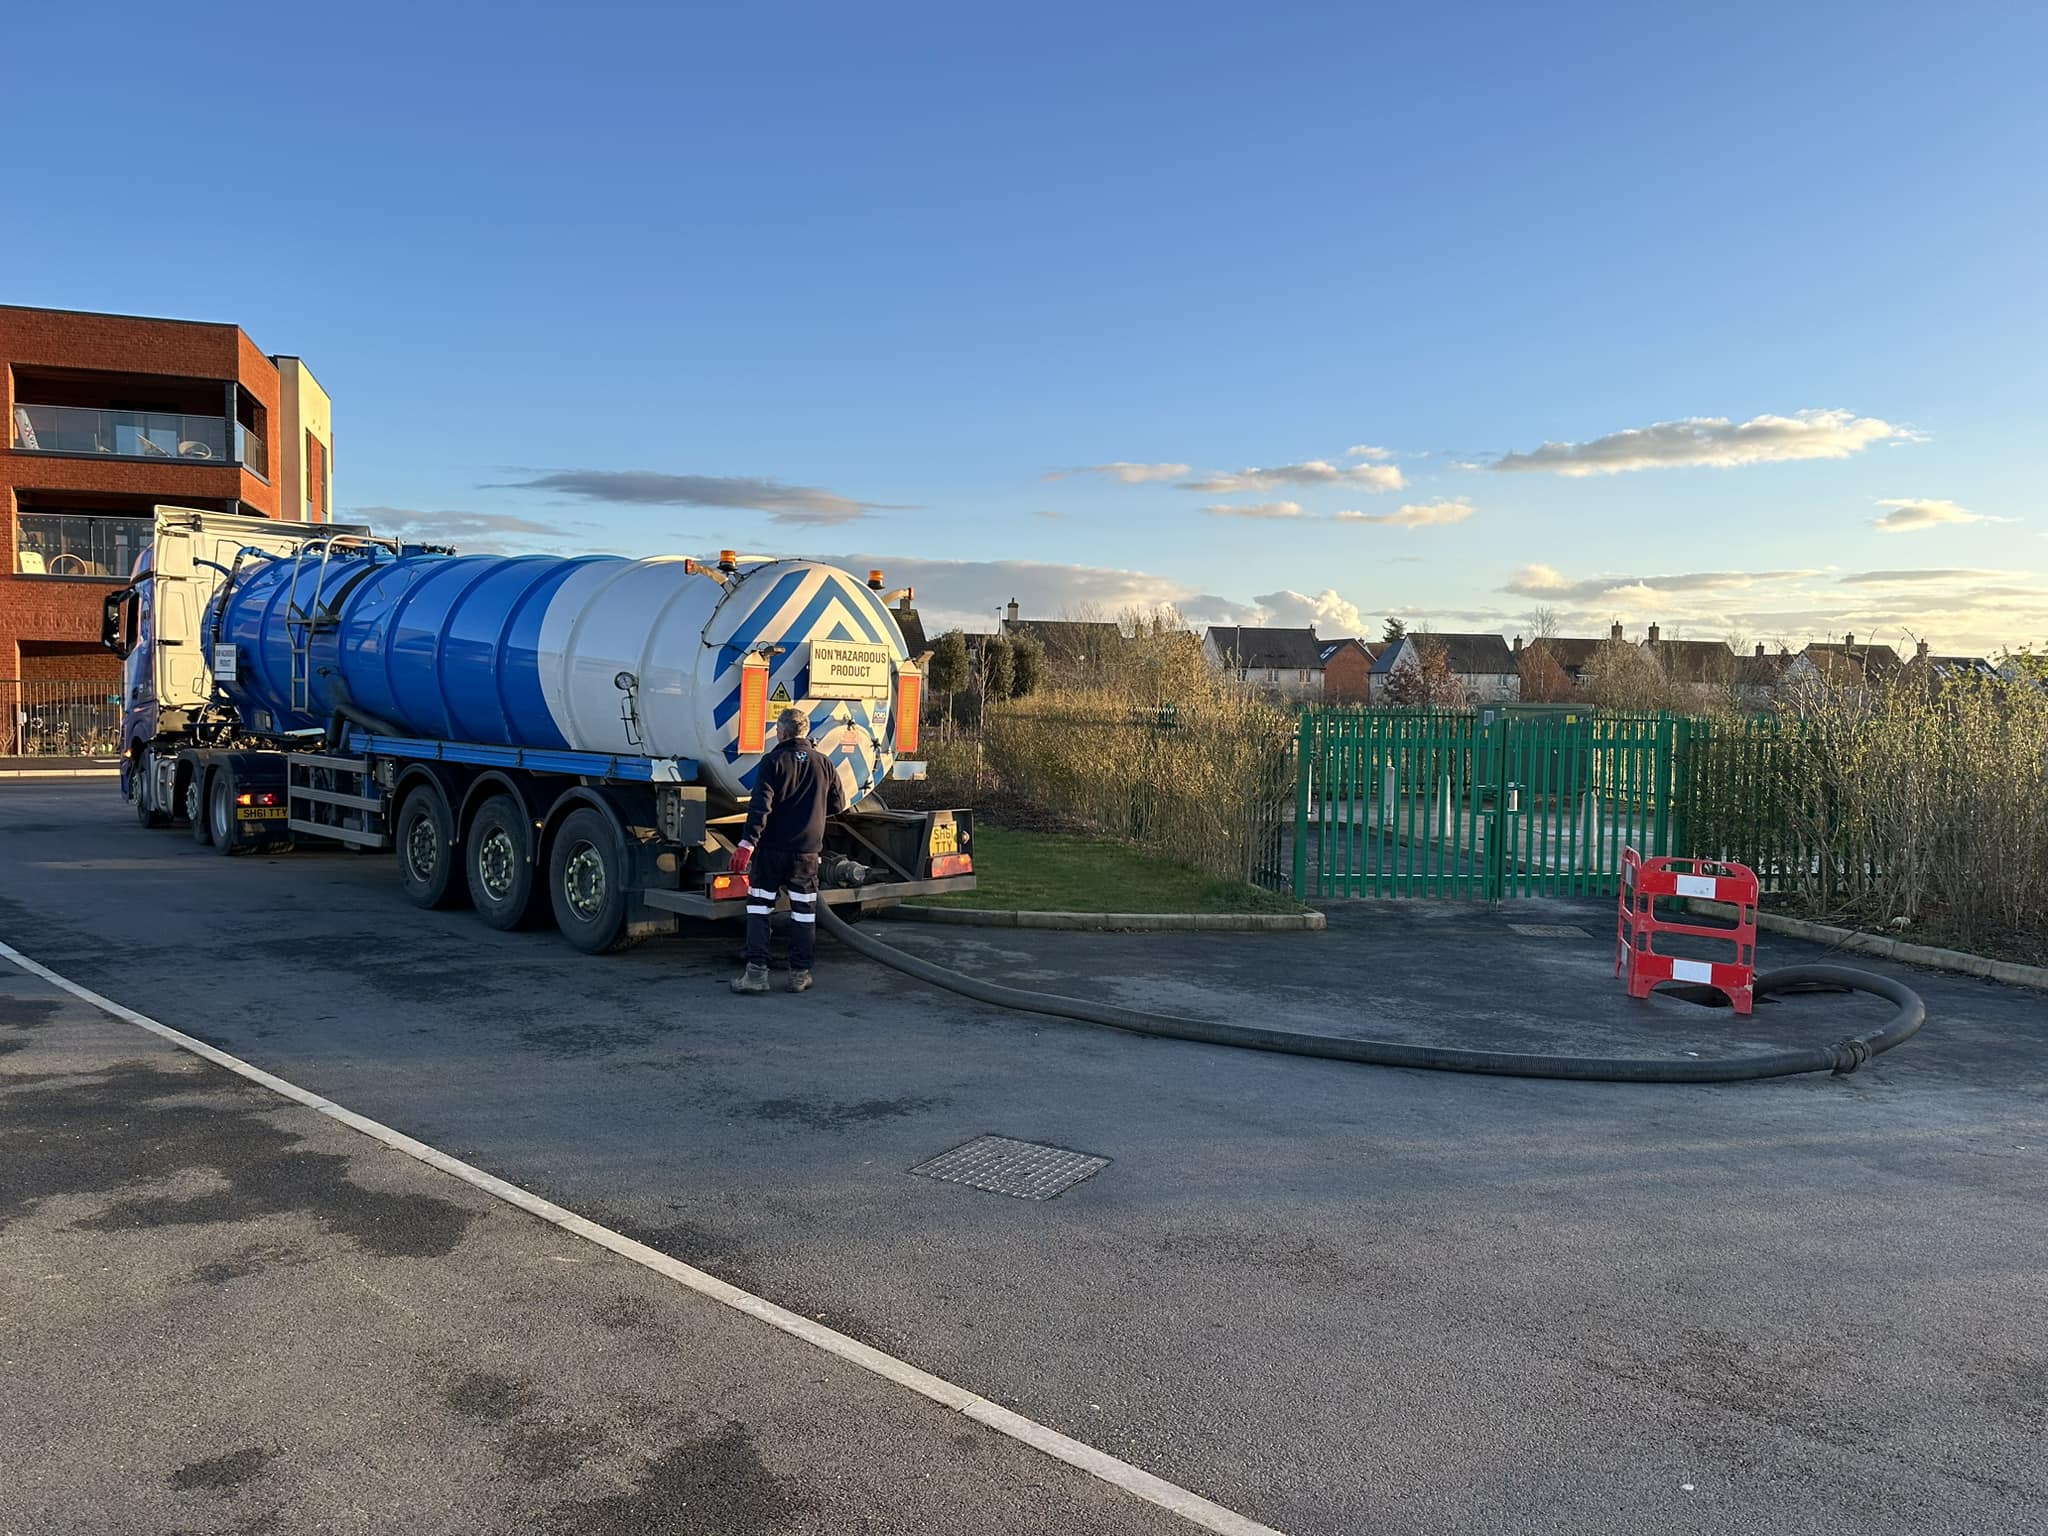 Tanker lorry working with drain on a sunny day.